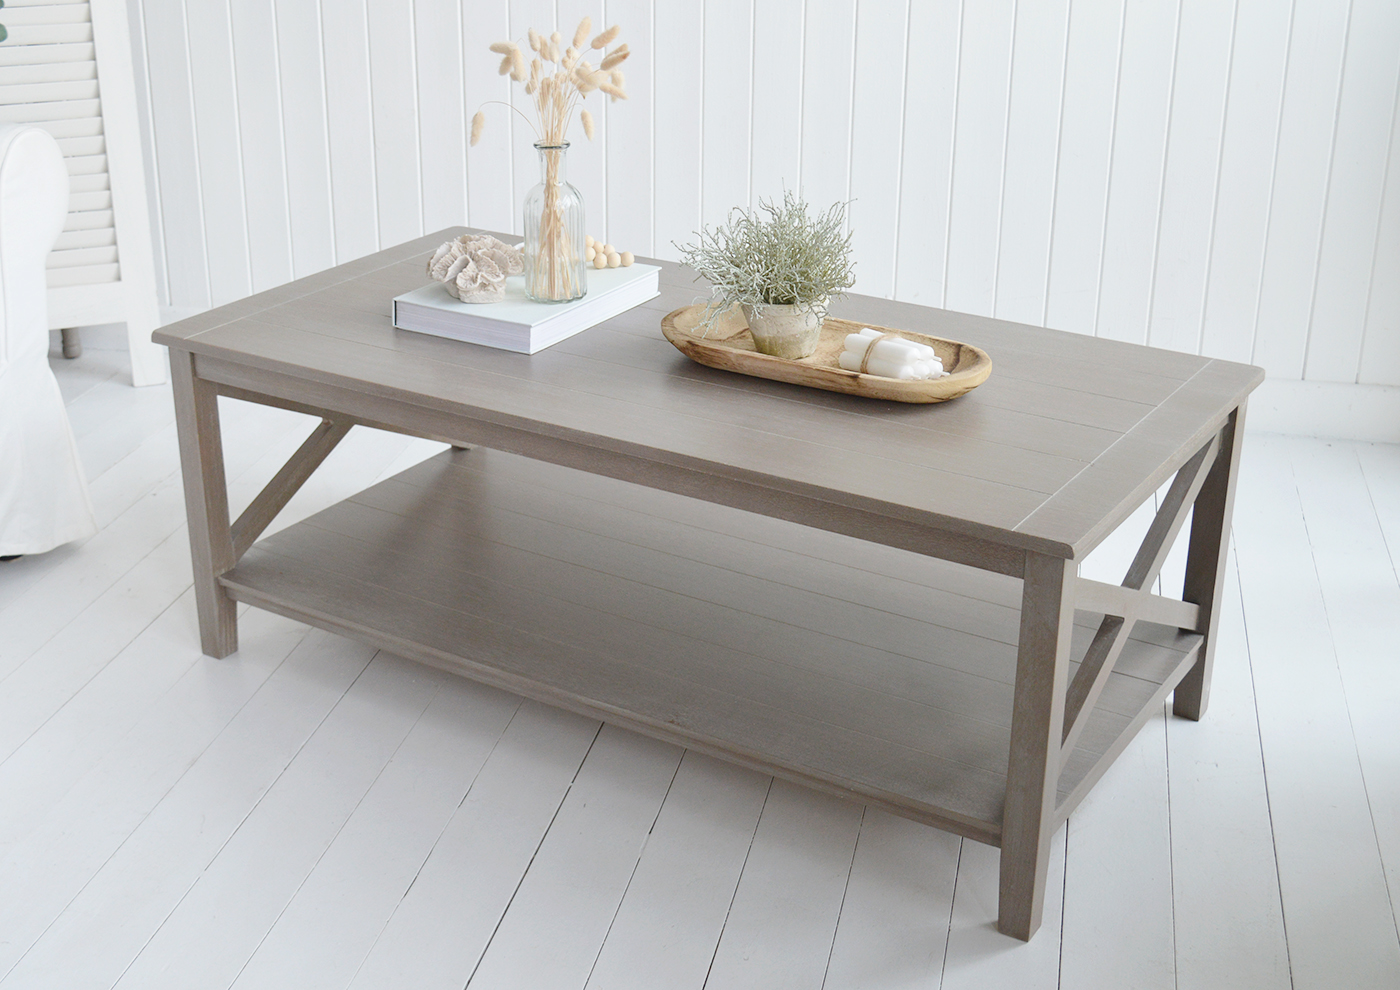 Driftwood grey Cambridge Coffee Table - New England Interiors Furniture for Coastal, Modern Farmhouse and Country Homes